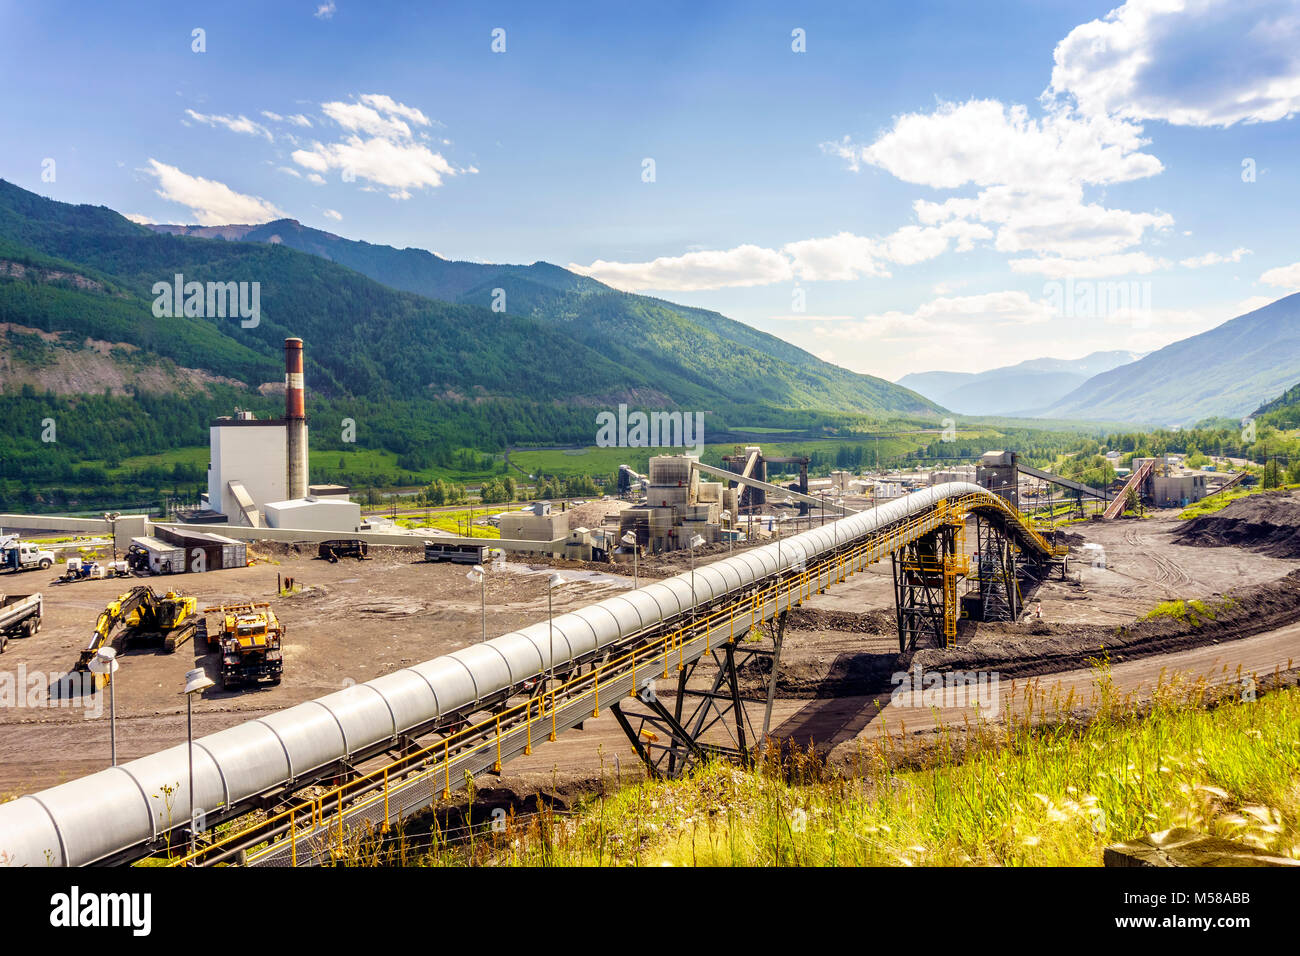 Big industrial infrastructure among mountains in Alberta, Canada Stock Photo